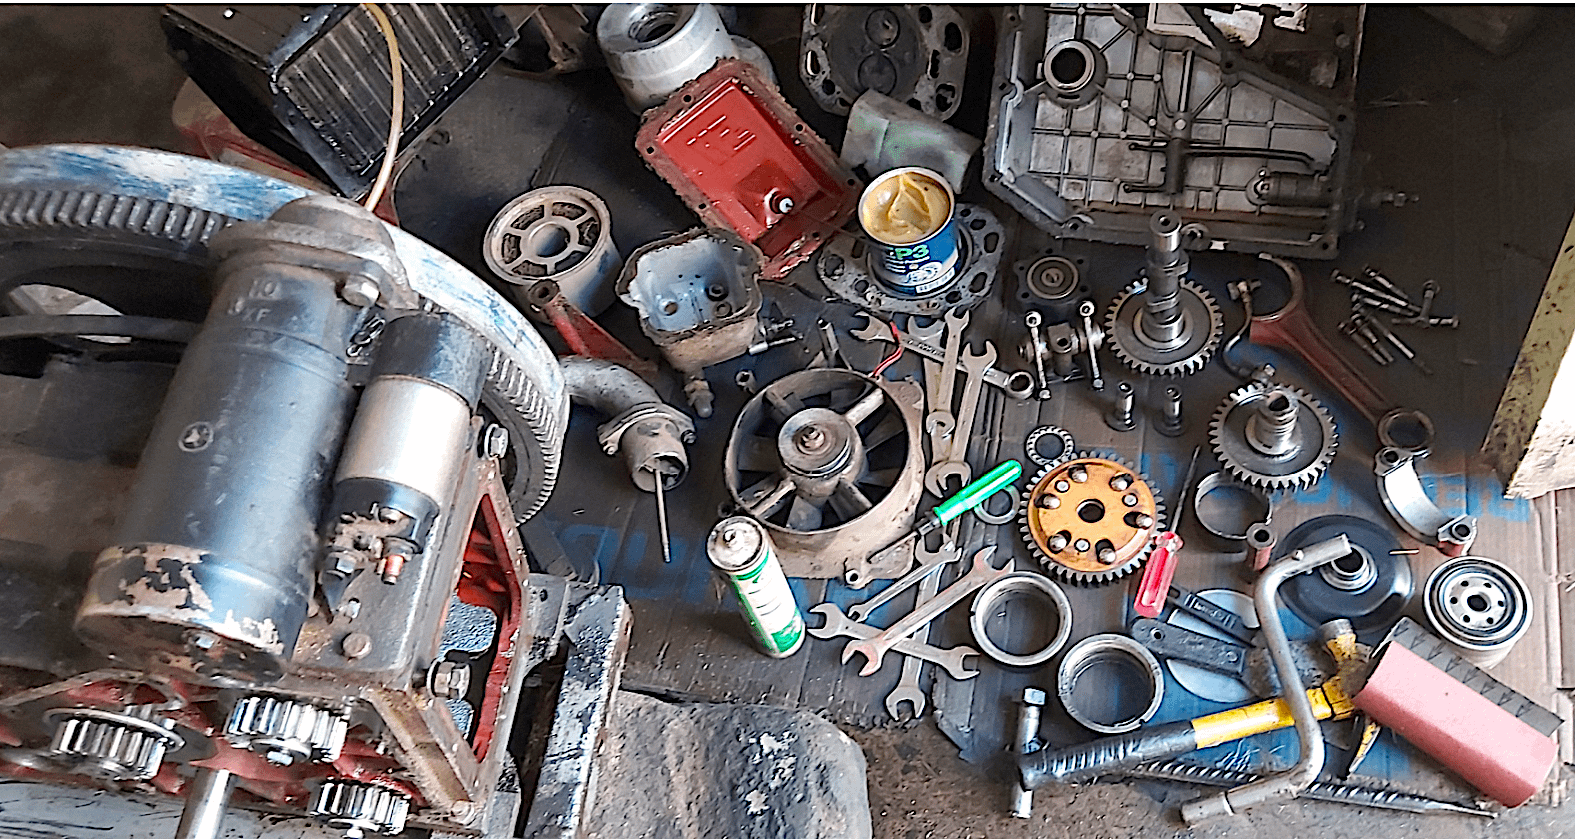 Tools and spare machinery parts lie on the ground during at Beyene Chufamo’s workshop in Meki, Ethiopia. (Photo: CIMMYT)